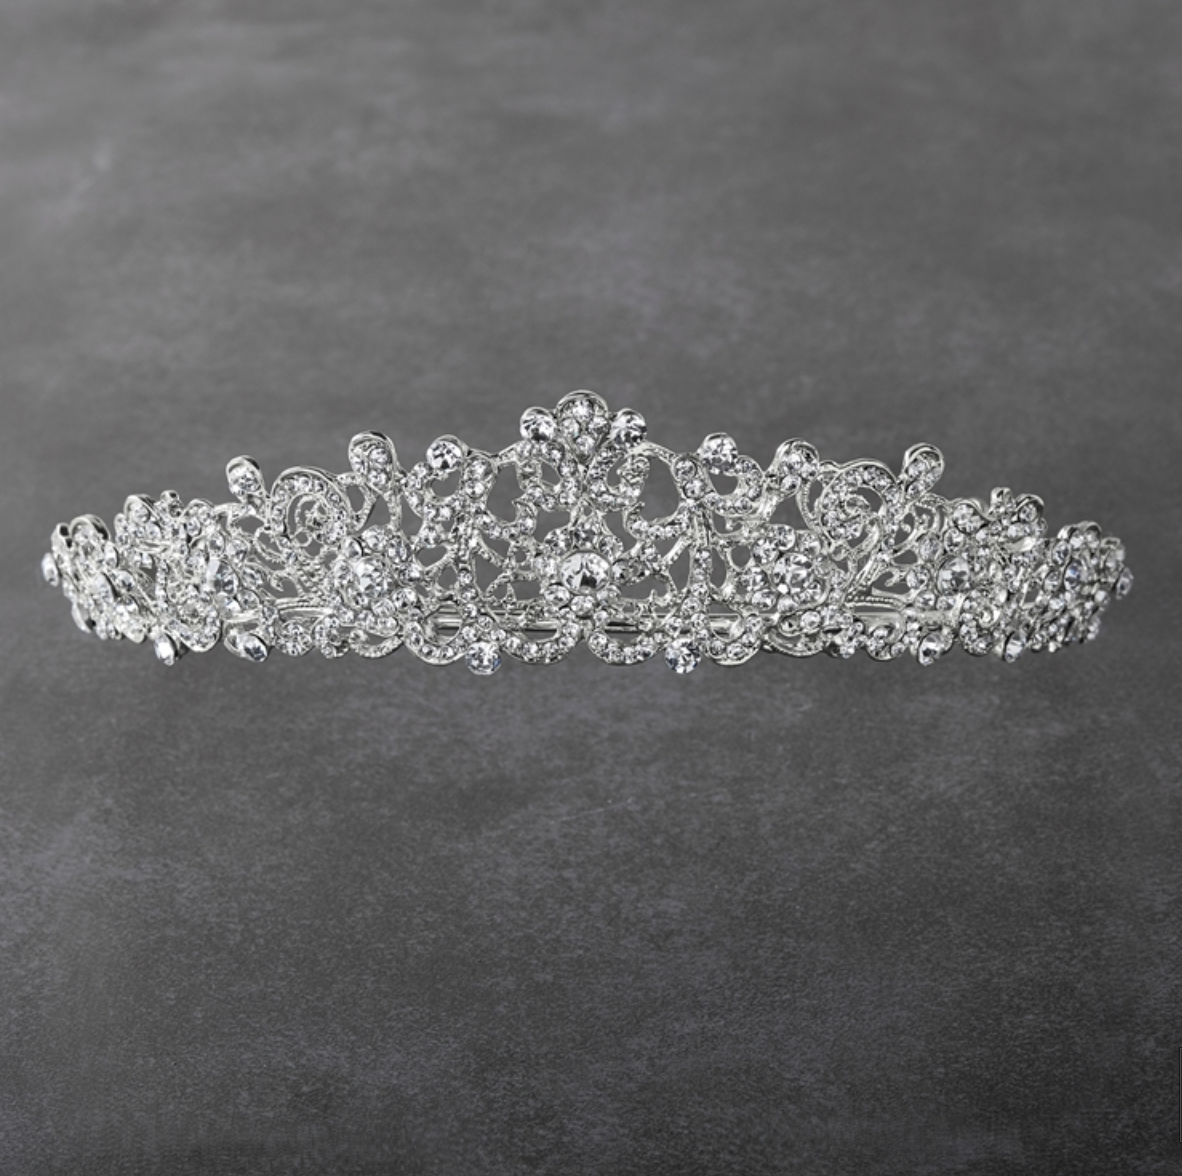 Vintage Filigree Silver Tiara with Clear Crystals